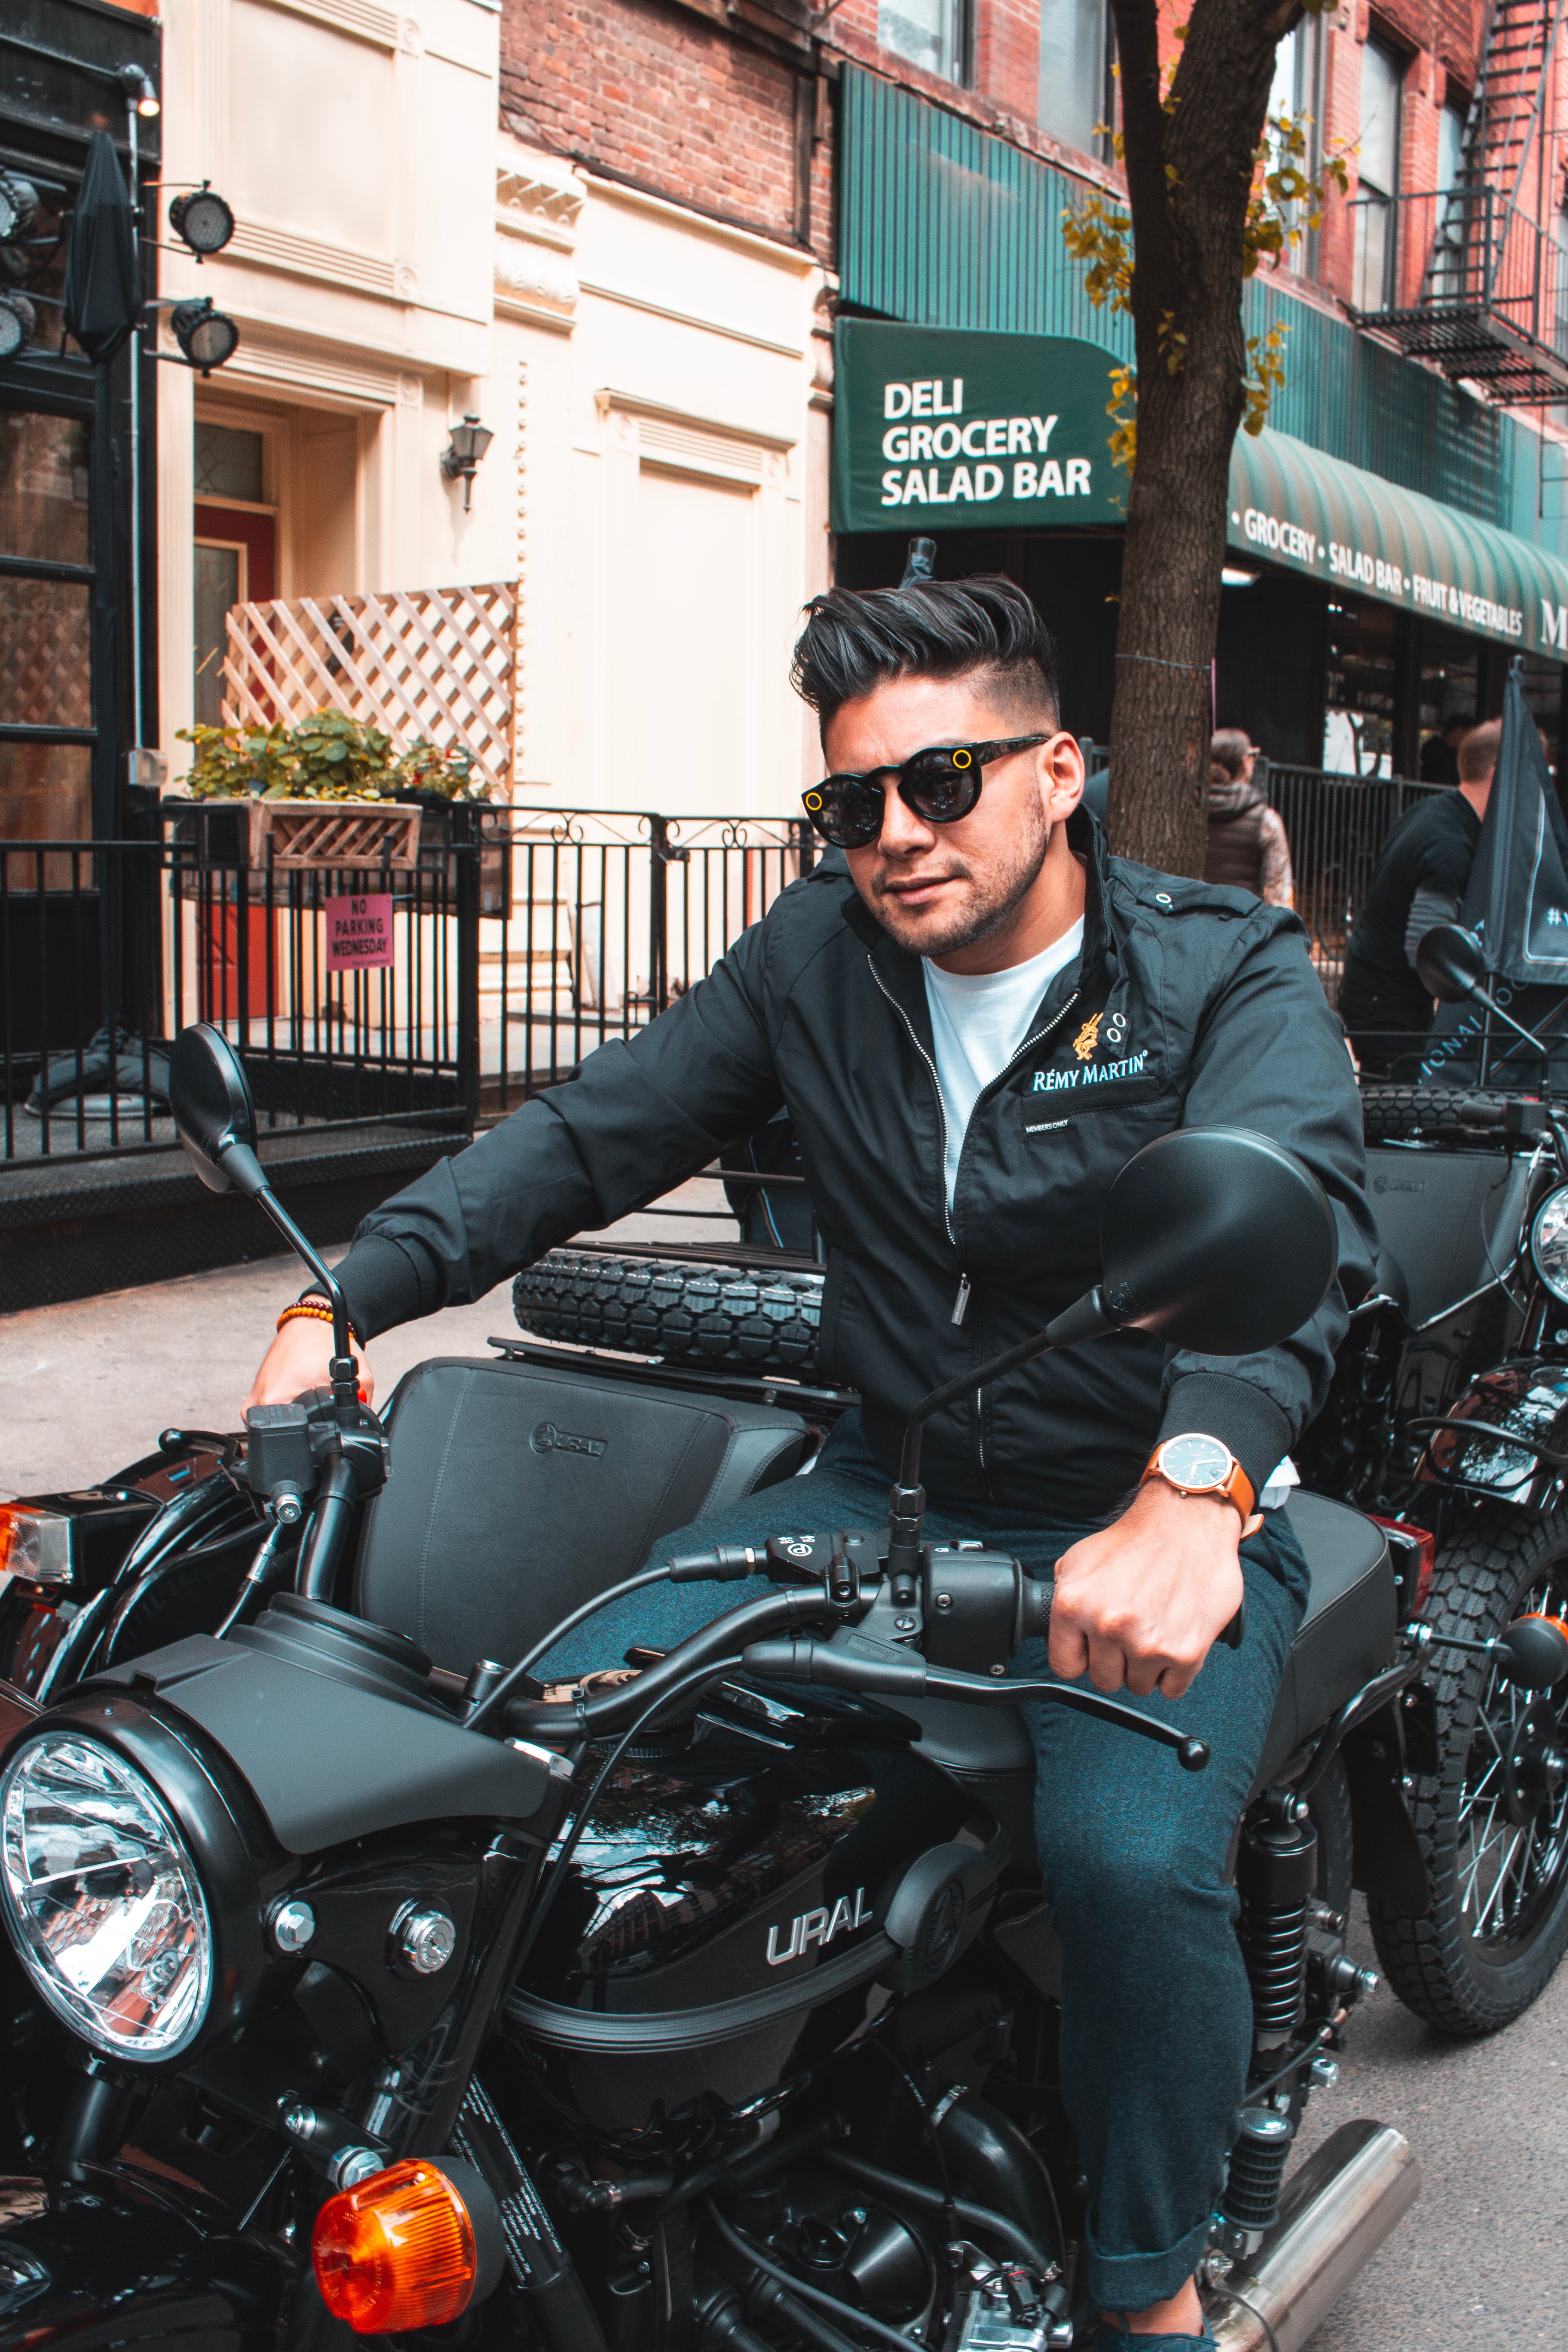 Complete Guide To Insuring Your Motorbike - man riding a motorcycle with side car - dandy in the bronx